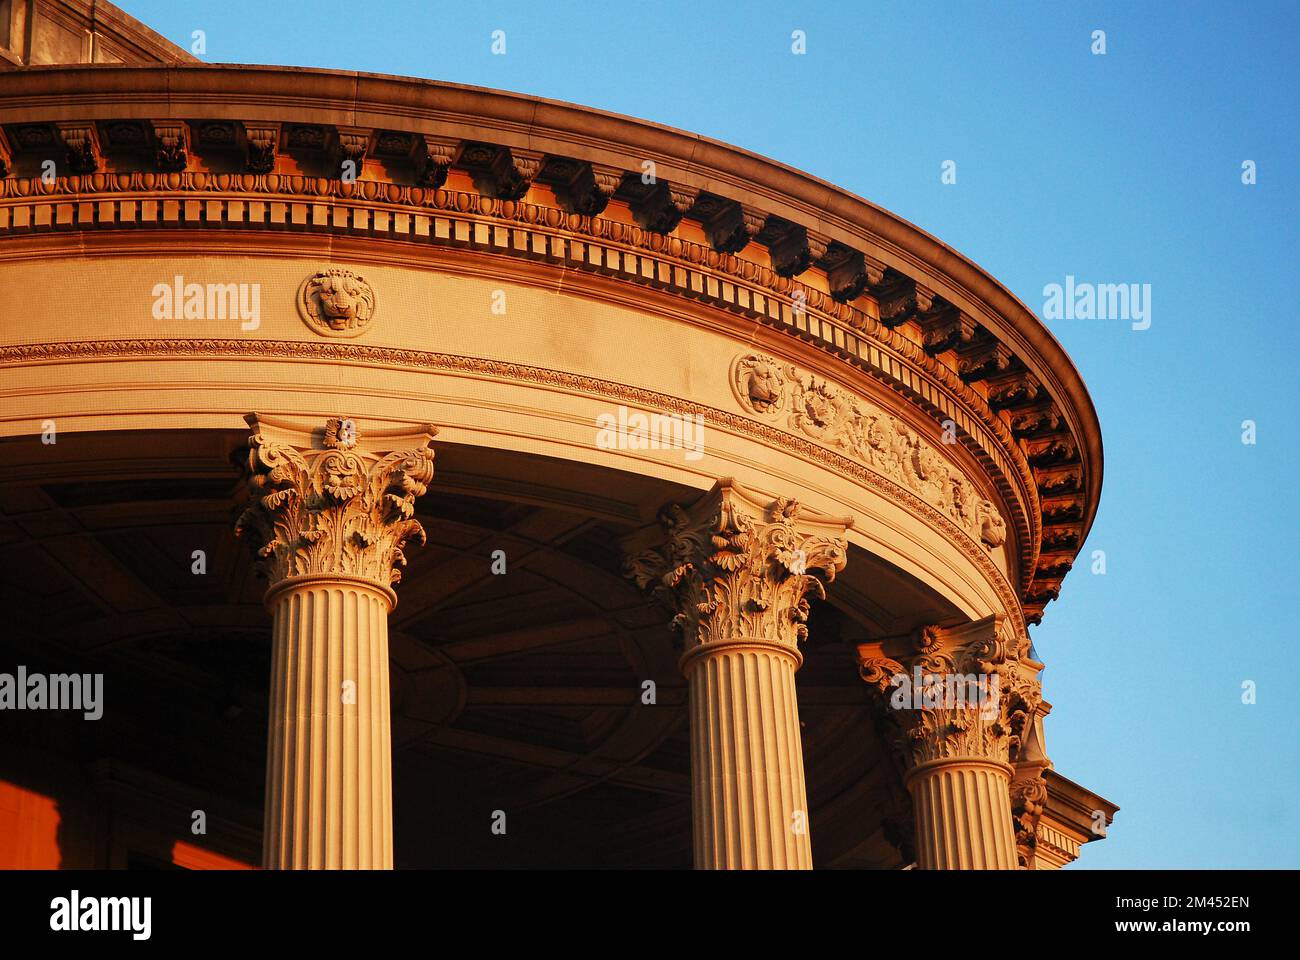 Details of the portico and the Corinthian columns  of the Vanderbilt Mansion in Hyde Park, New York Stock Photo